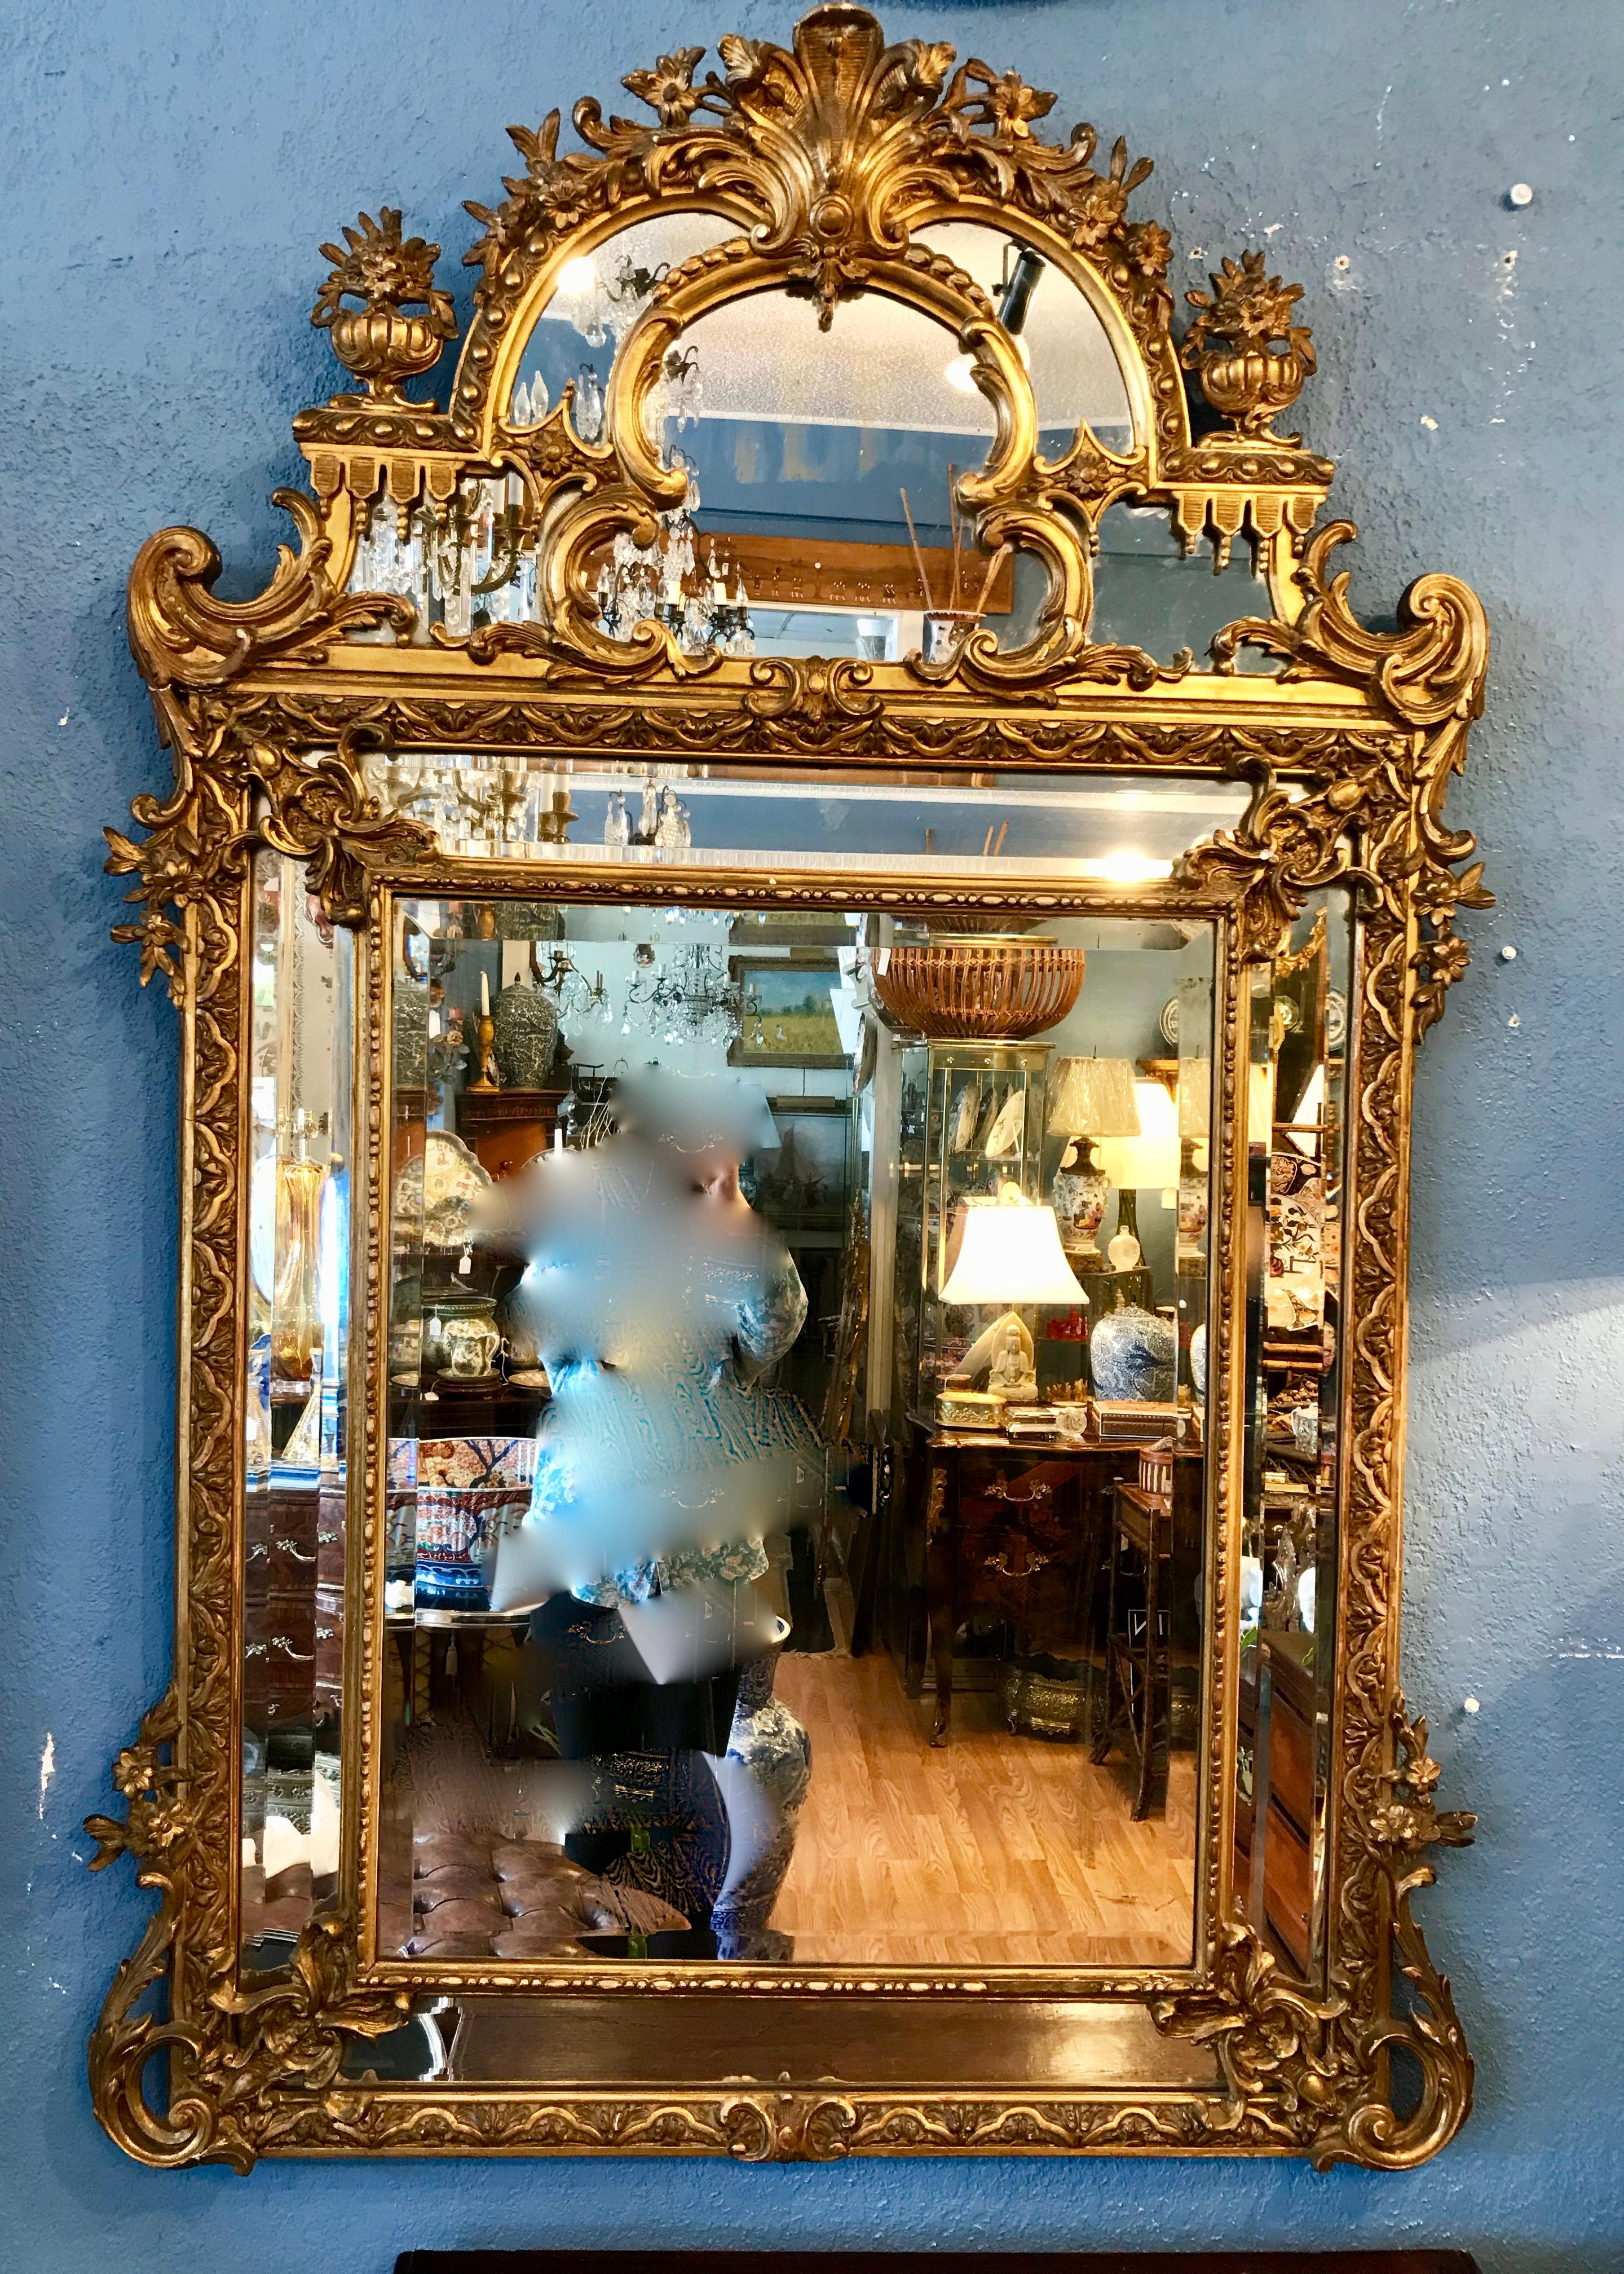 Dramatic scale and proportions . The mirror is exquisitely carved and detailed.
Fine 19th century workmanship. Each of the 4 bottom half mirrored panels are beveled.
The top is appointed with finials and a central shell carved cartouche.